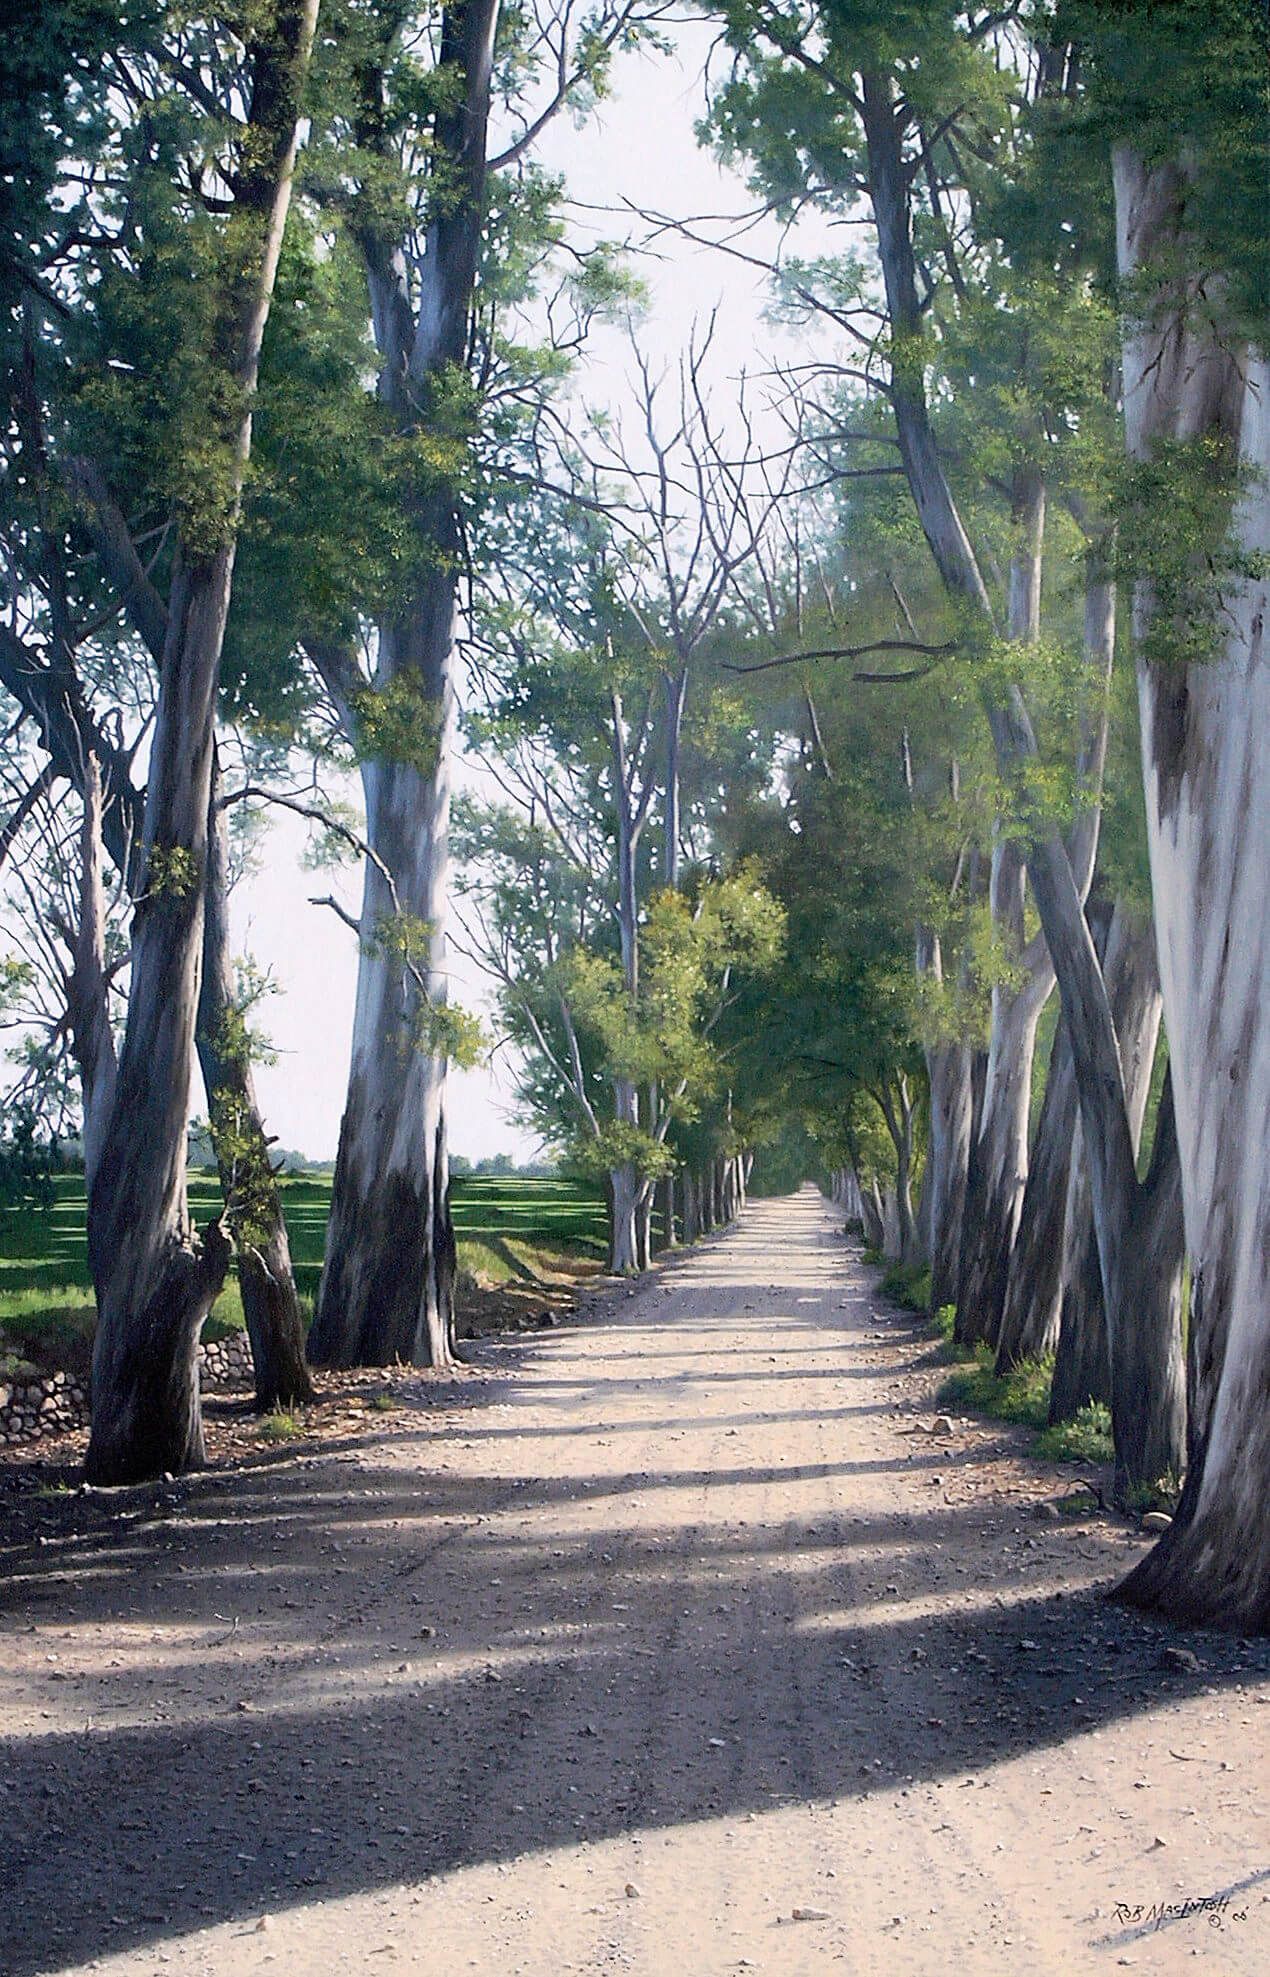 Photorealistic painting of a road arrayed with bluegum trees on both sides